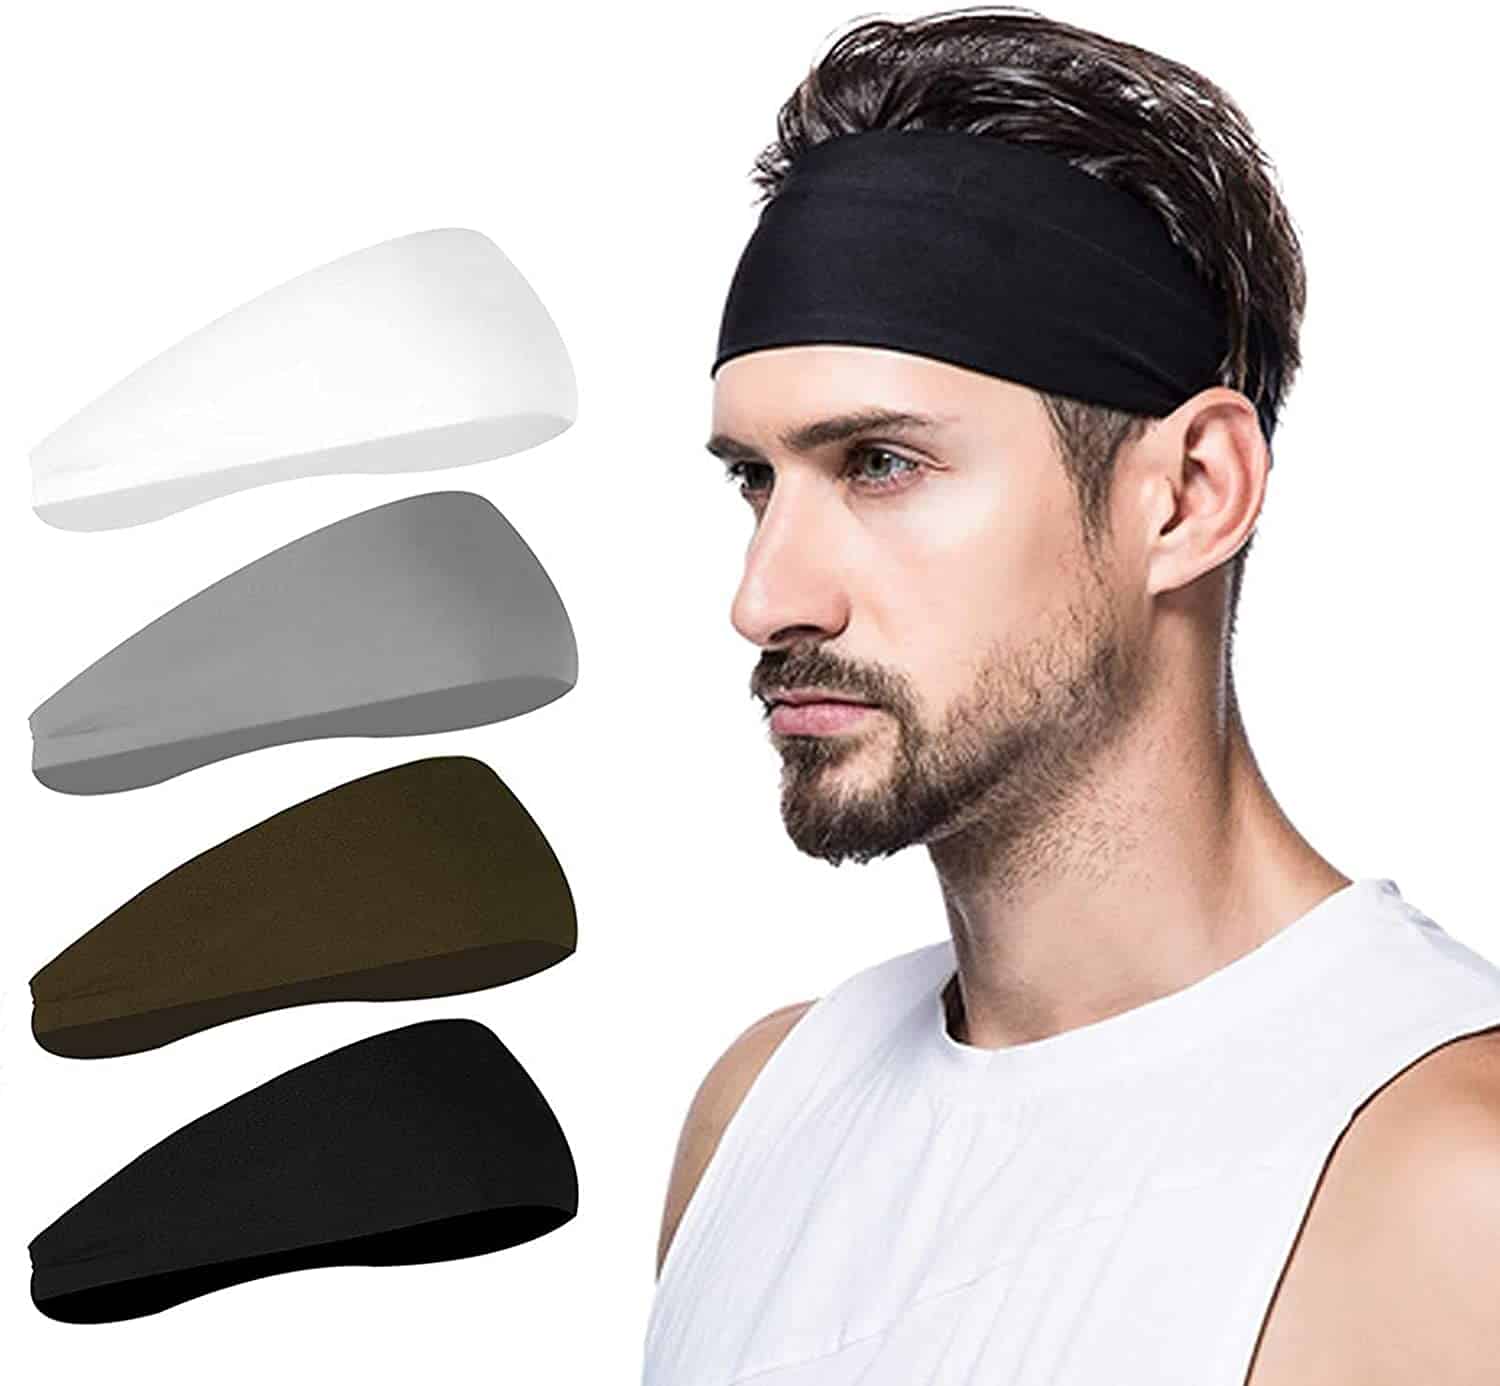 5 Best Basketball Headbands in 2022 (Detailed Review)